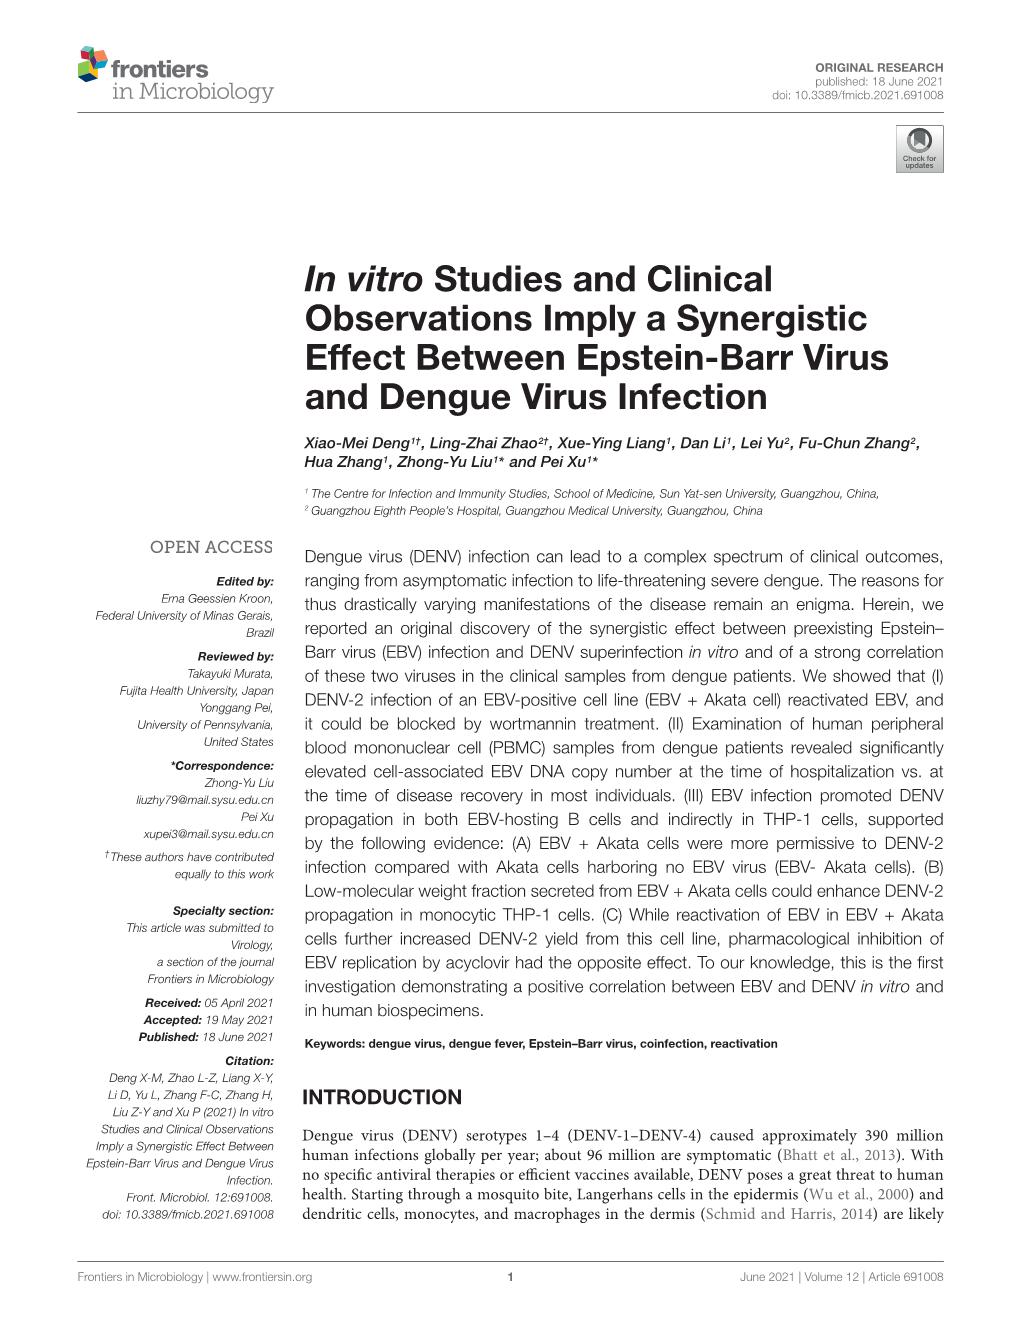 In Vitro Studies and Clinical Observations Imply a Synergistic Effect Between Epstein-Barr Virus and Dengue Virus Infection